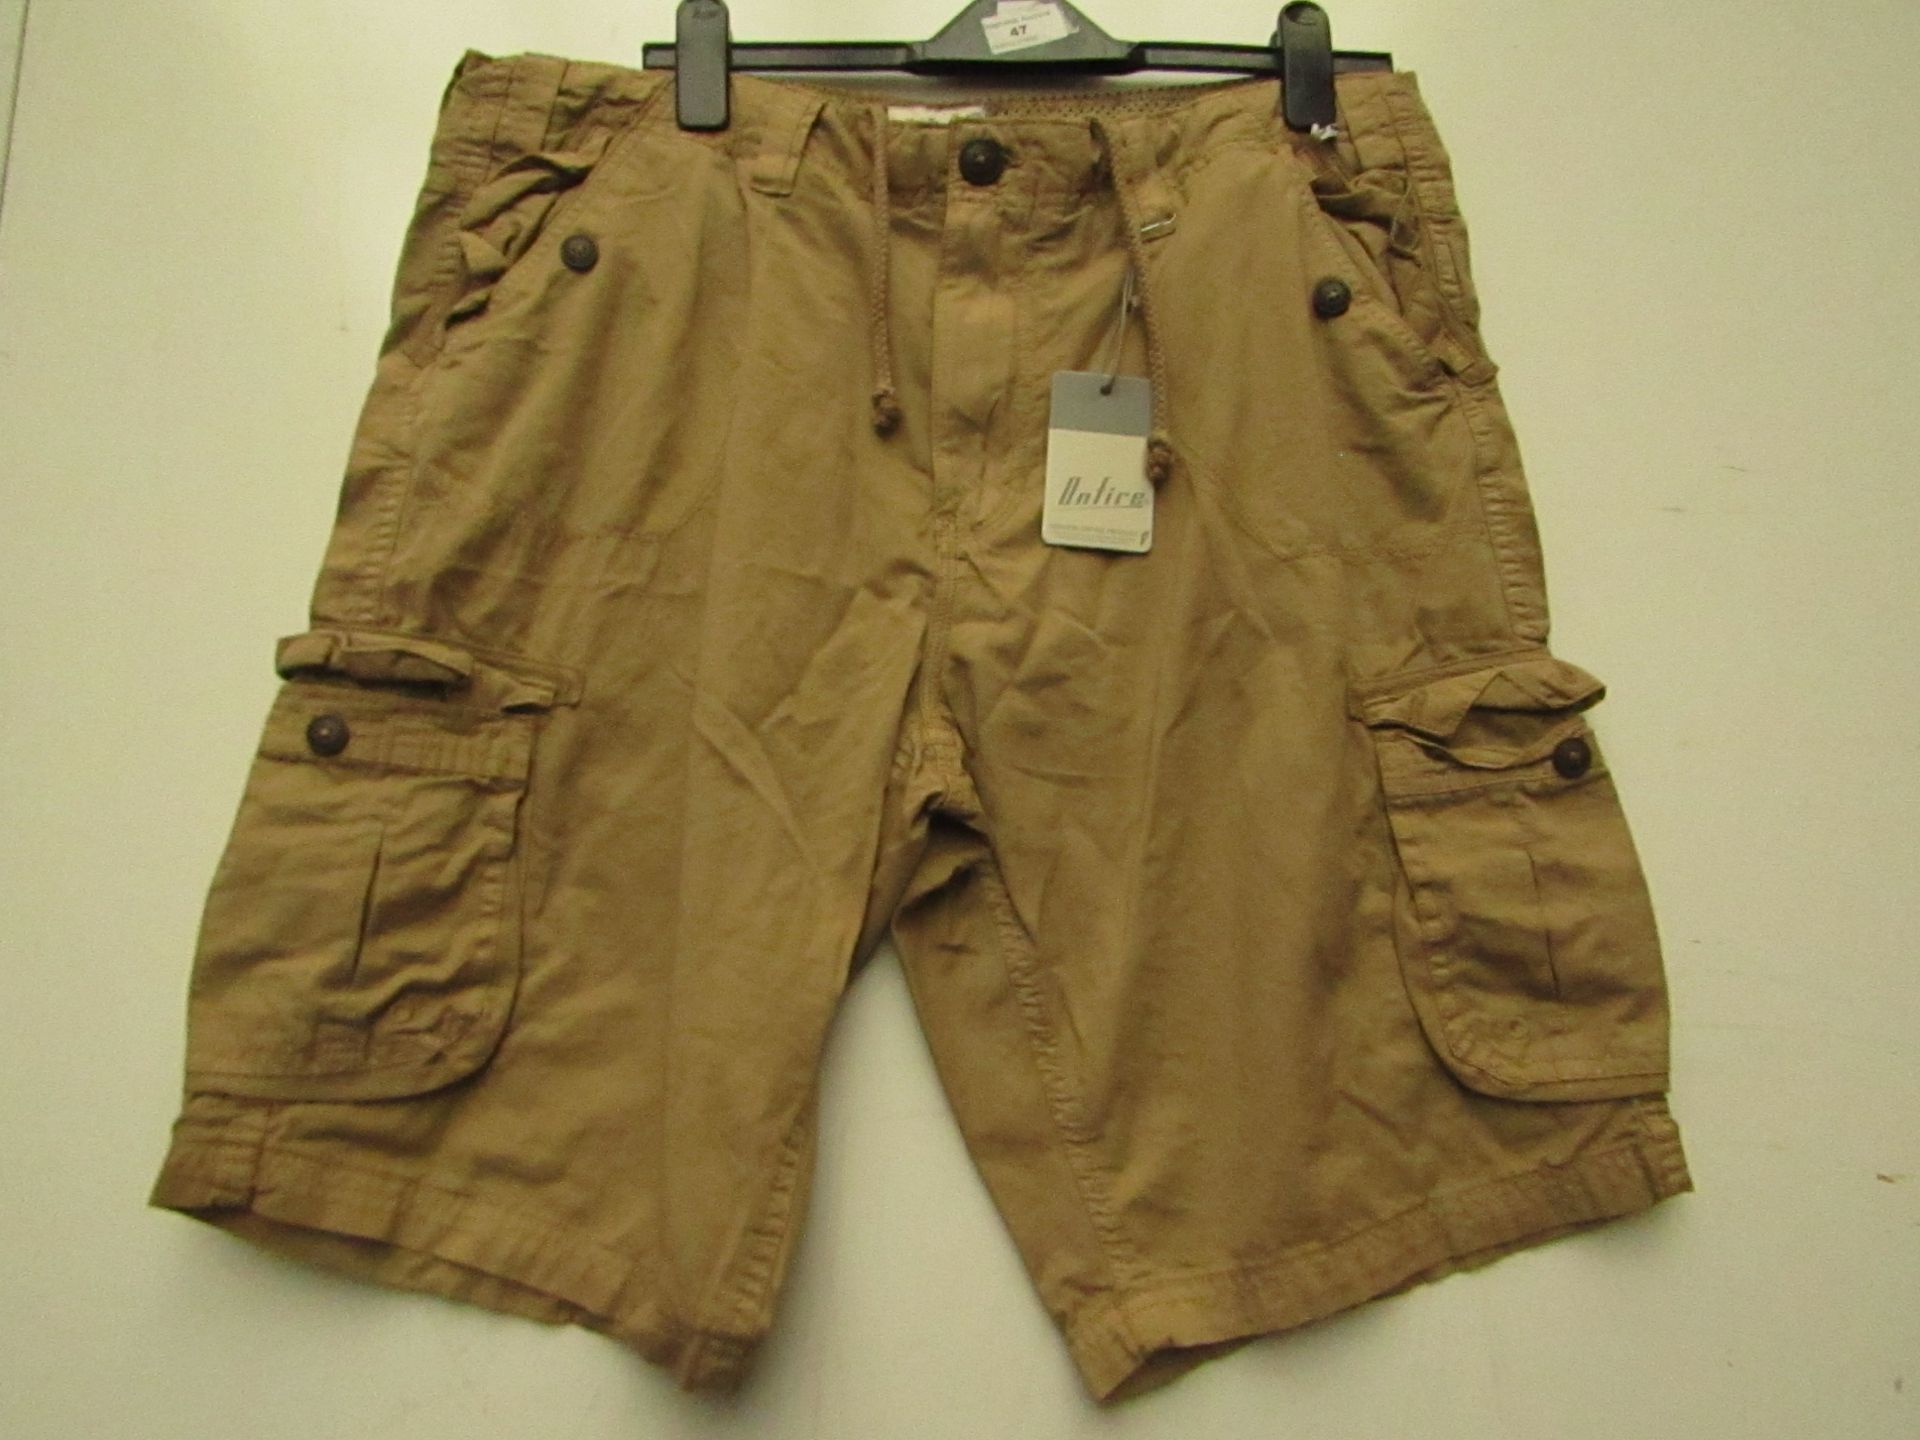 Onfire Mens Cargo Shorts size 36 new with tag see image